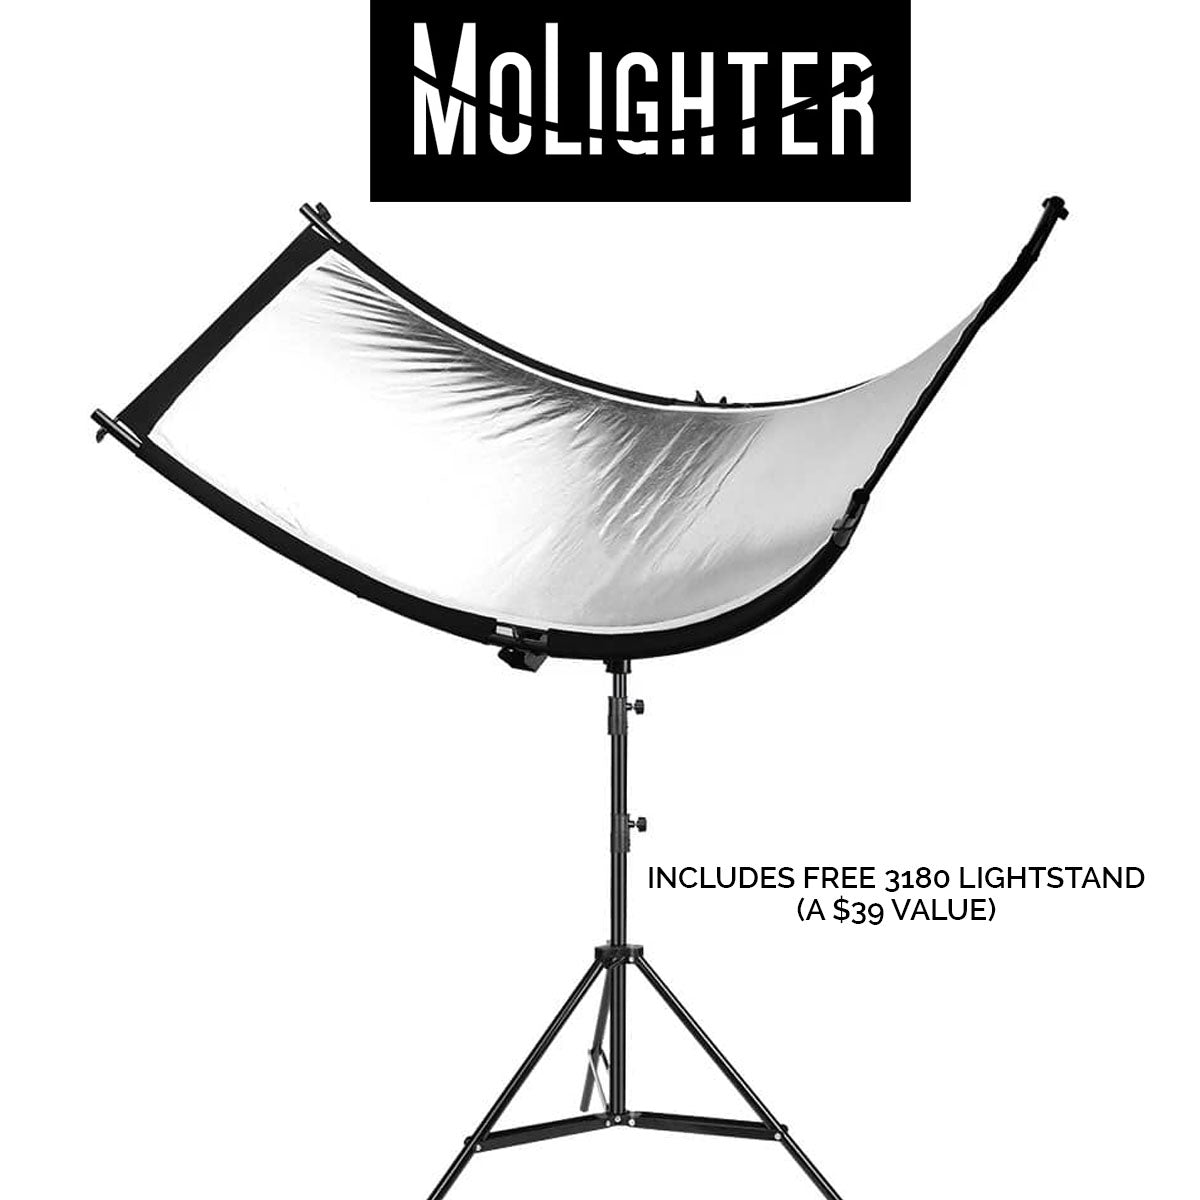 MoLighter Curved Reflector + FREE 3180 Lightstand